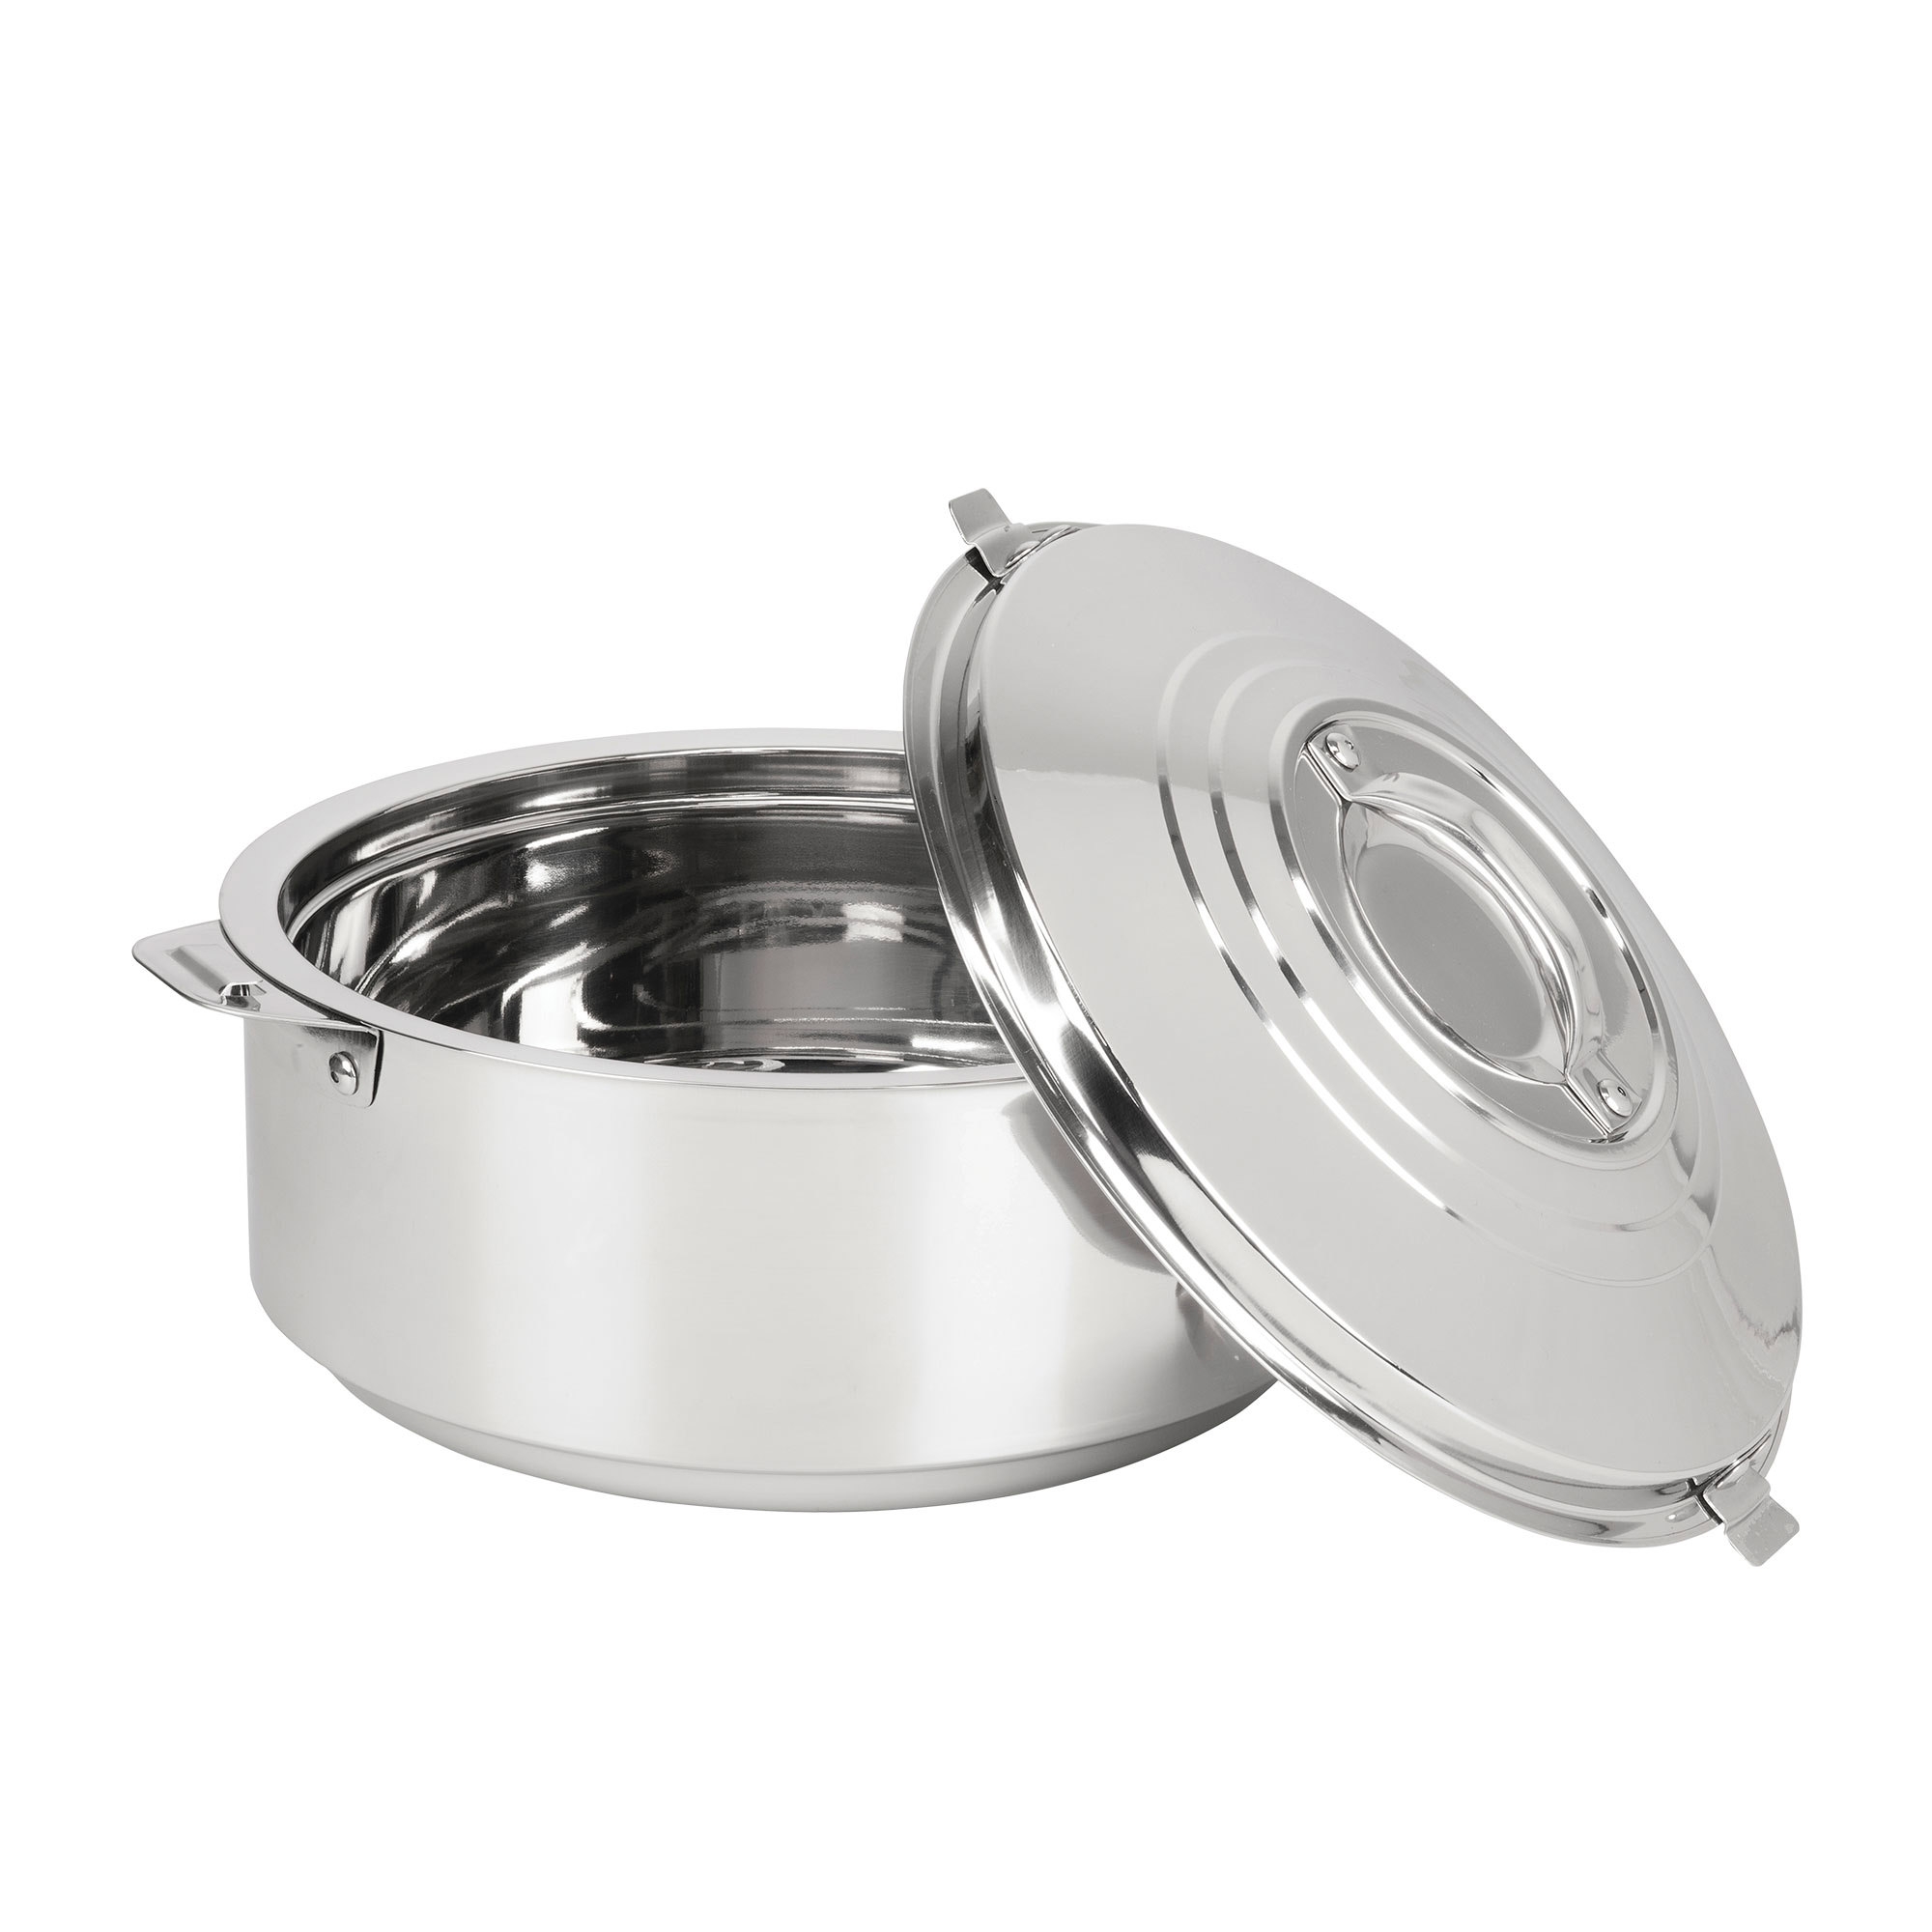 Pyrolux Stainless Steel Food Warmer 4.7L Image 1